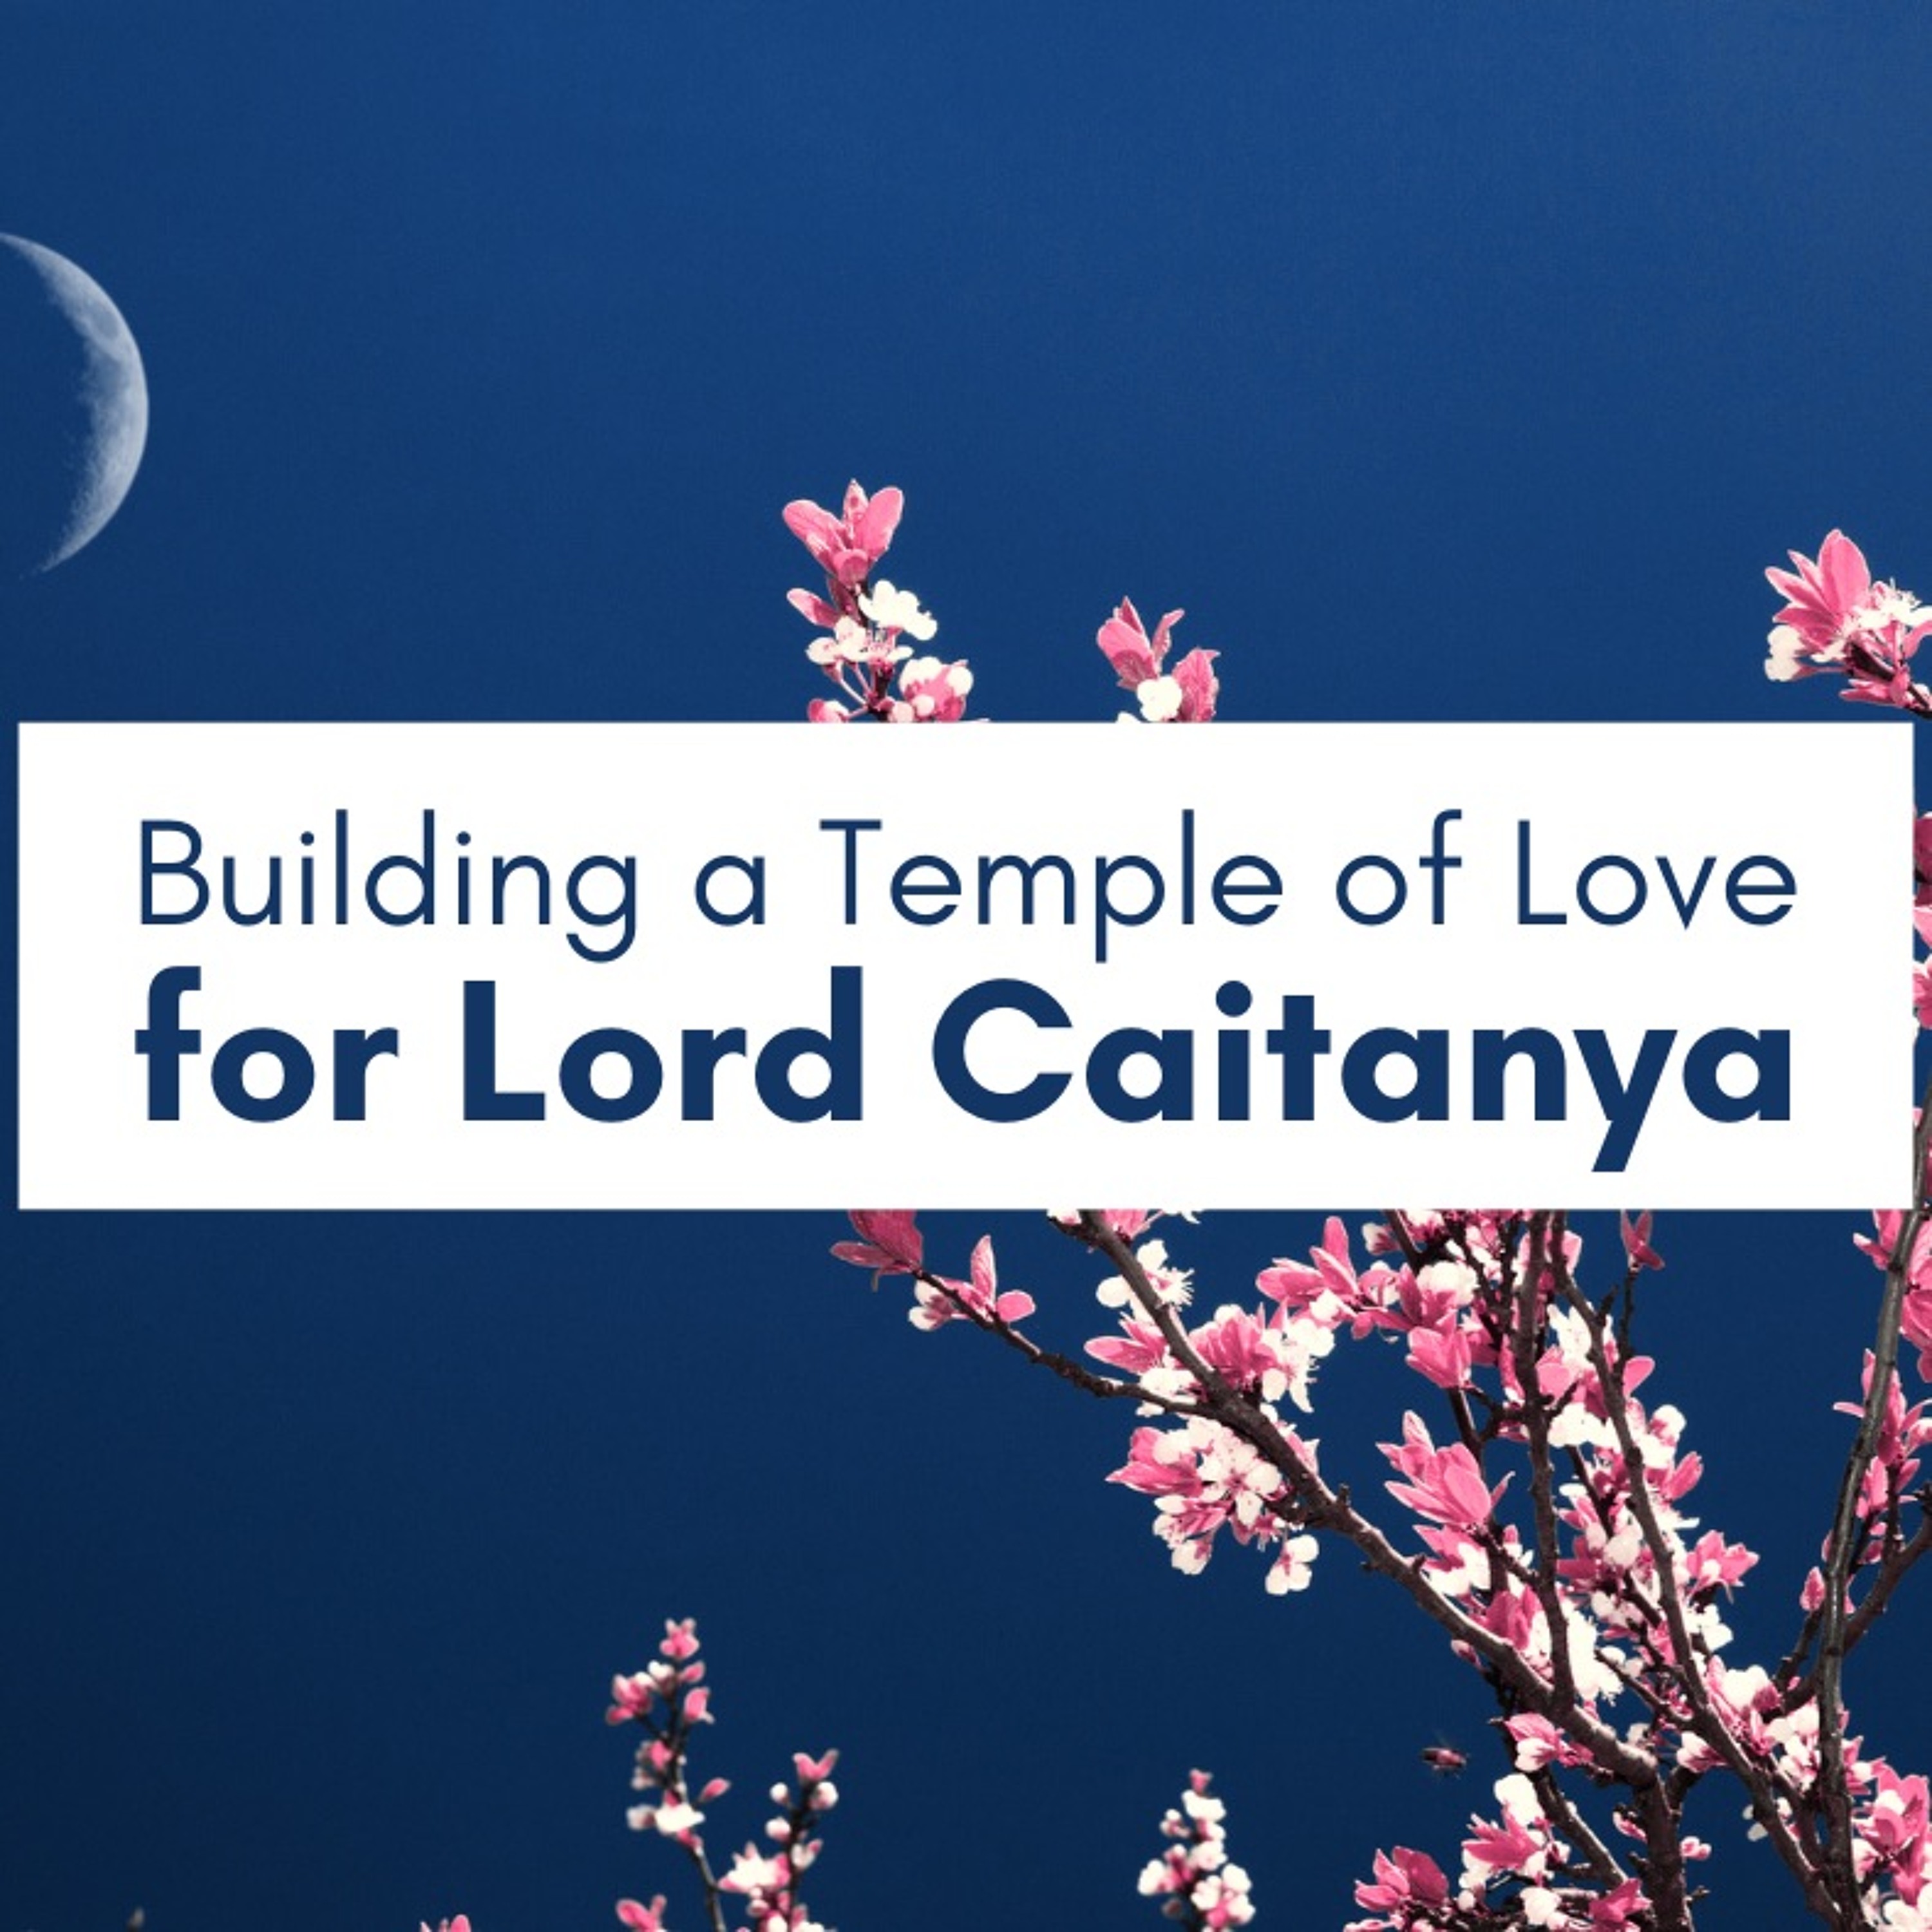 Building a Temple of Love for Lord Caitanya